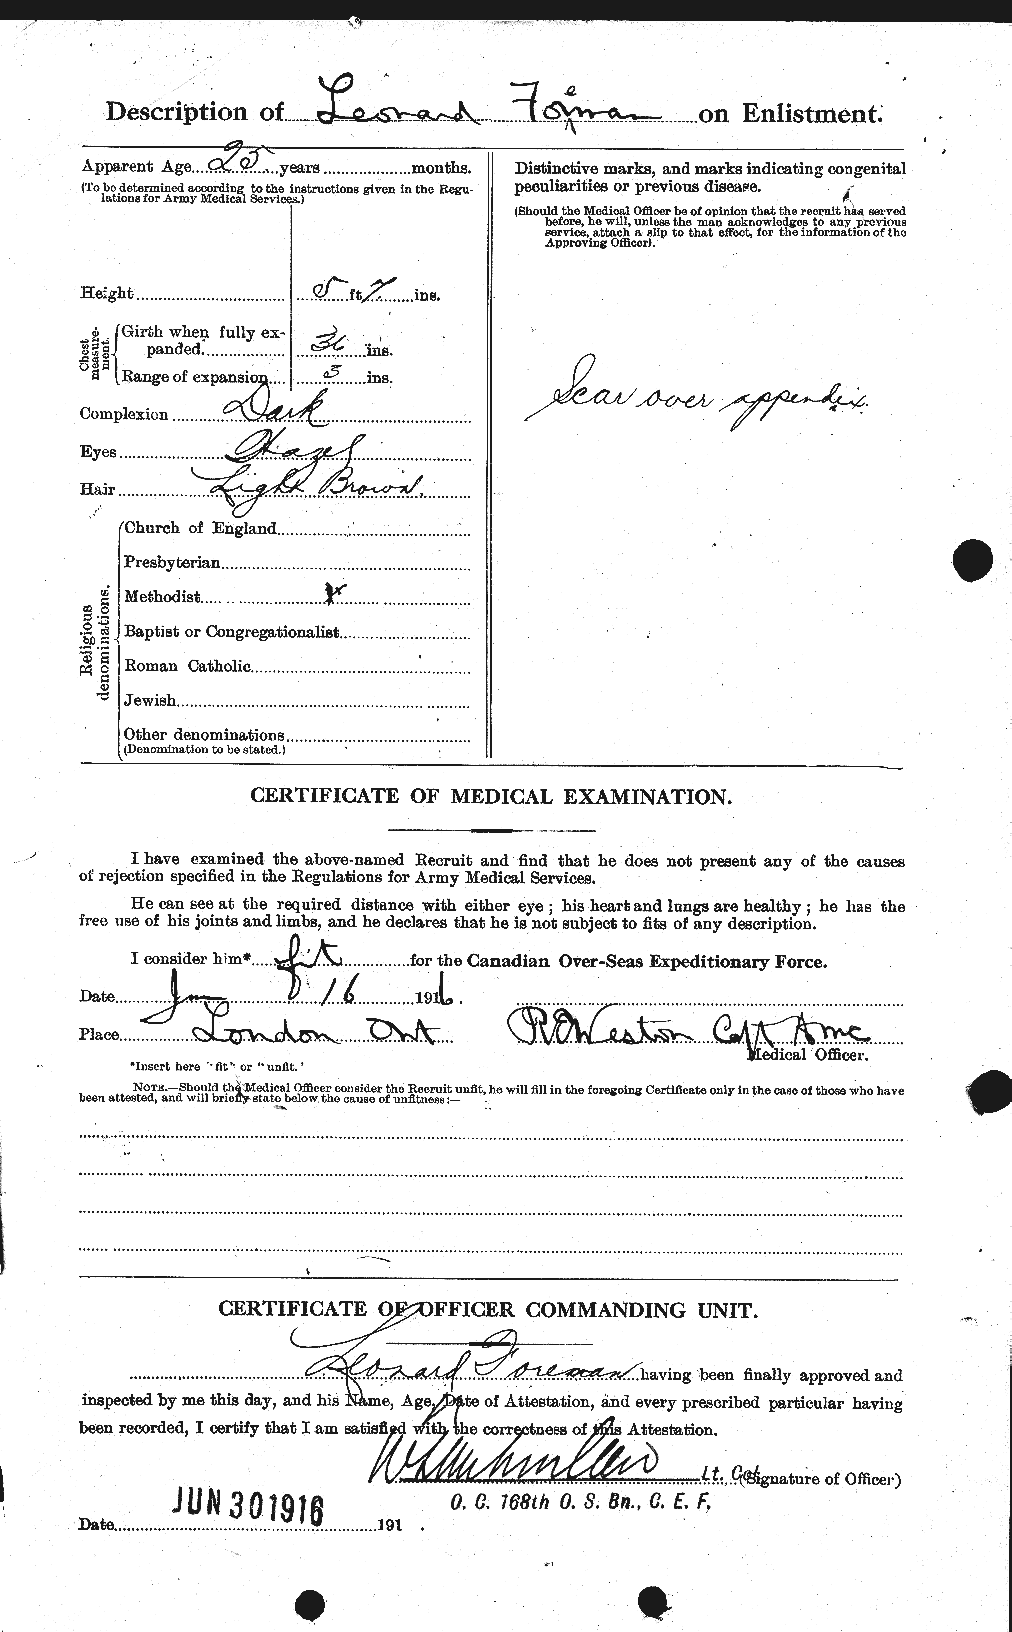 Personnel Records of the First World War - CEF 332699b